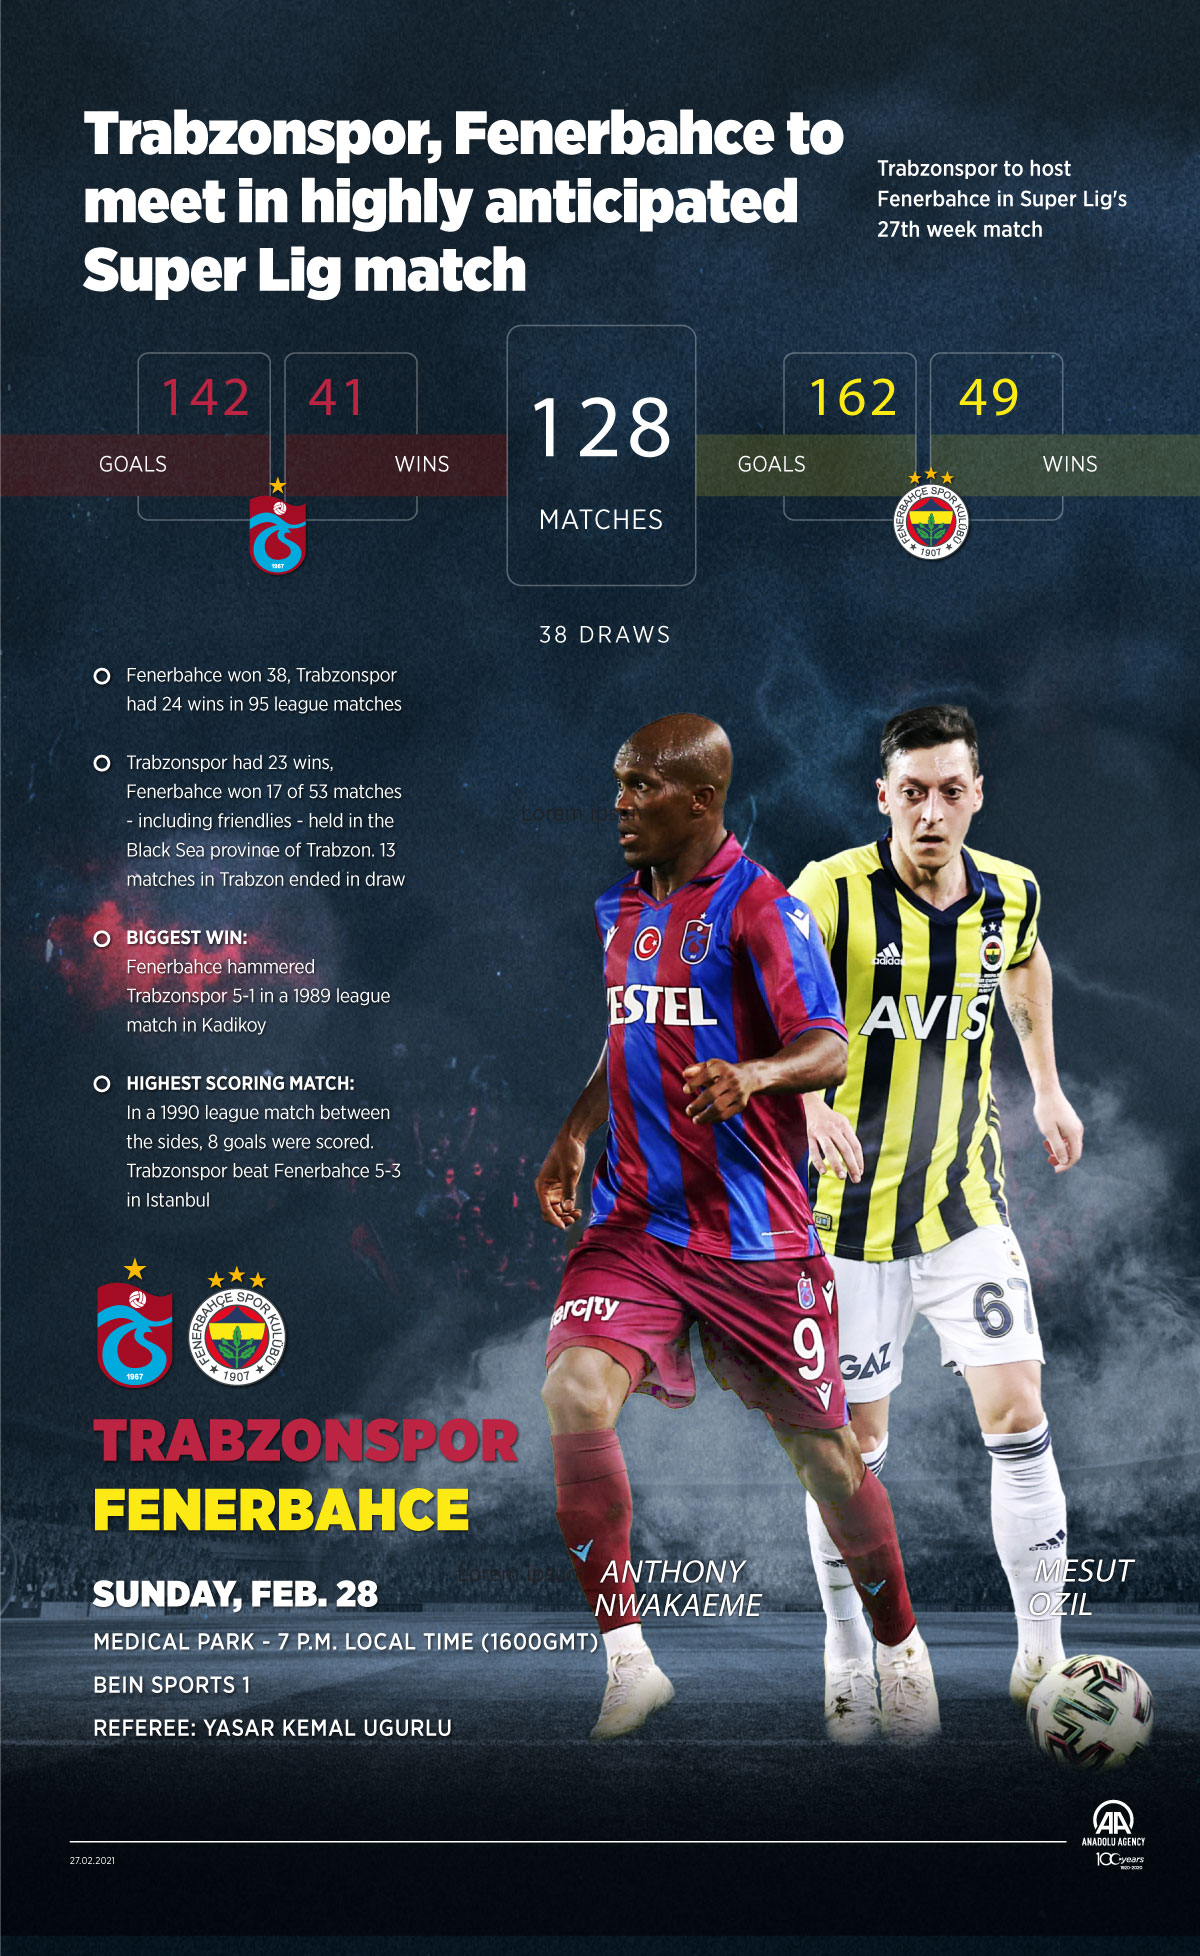  Trabzonspor, Fenerbahce to meet in highly anticipated Super Lig match